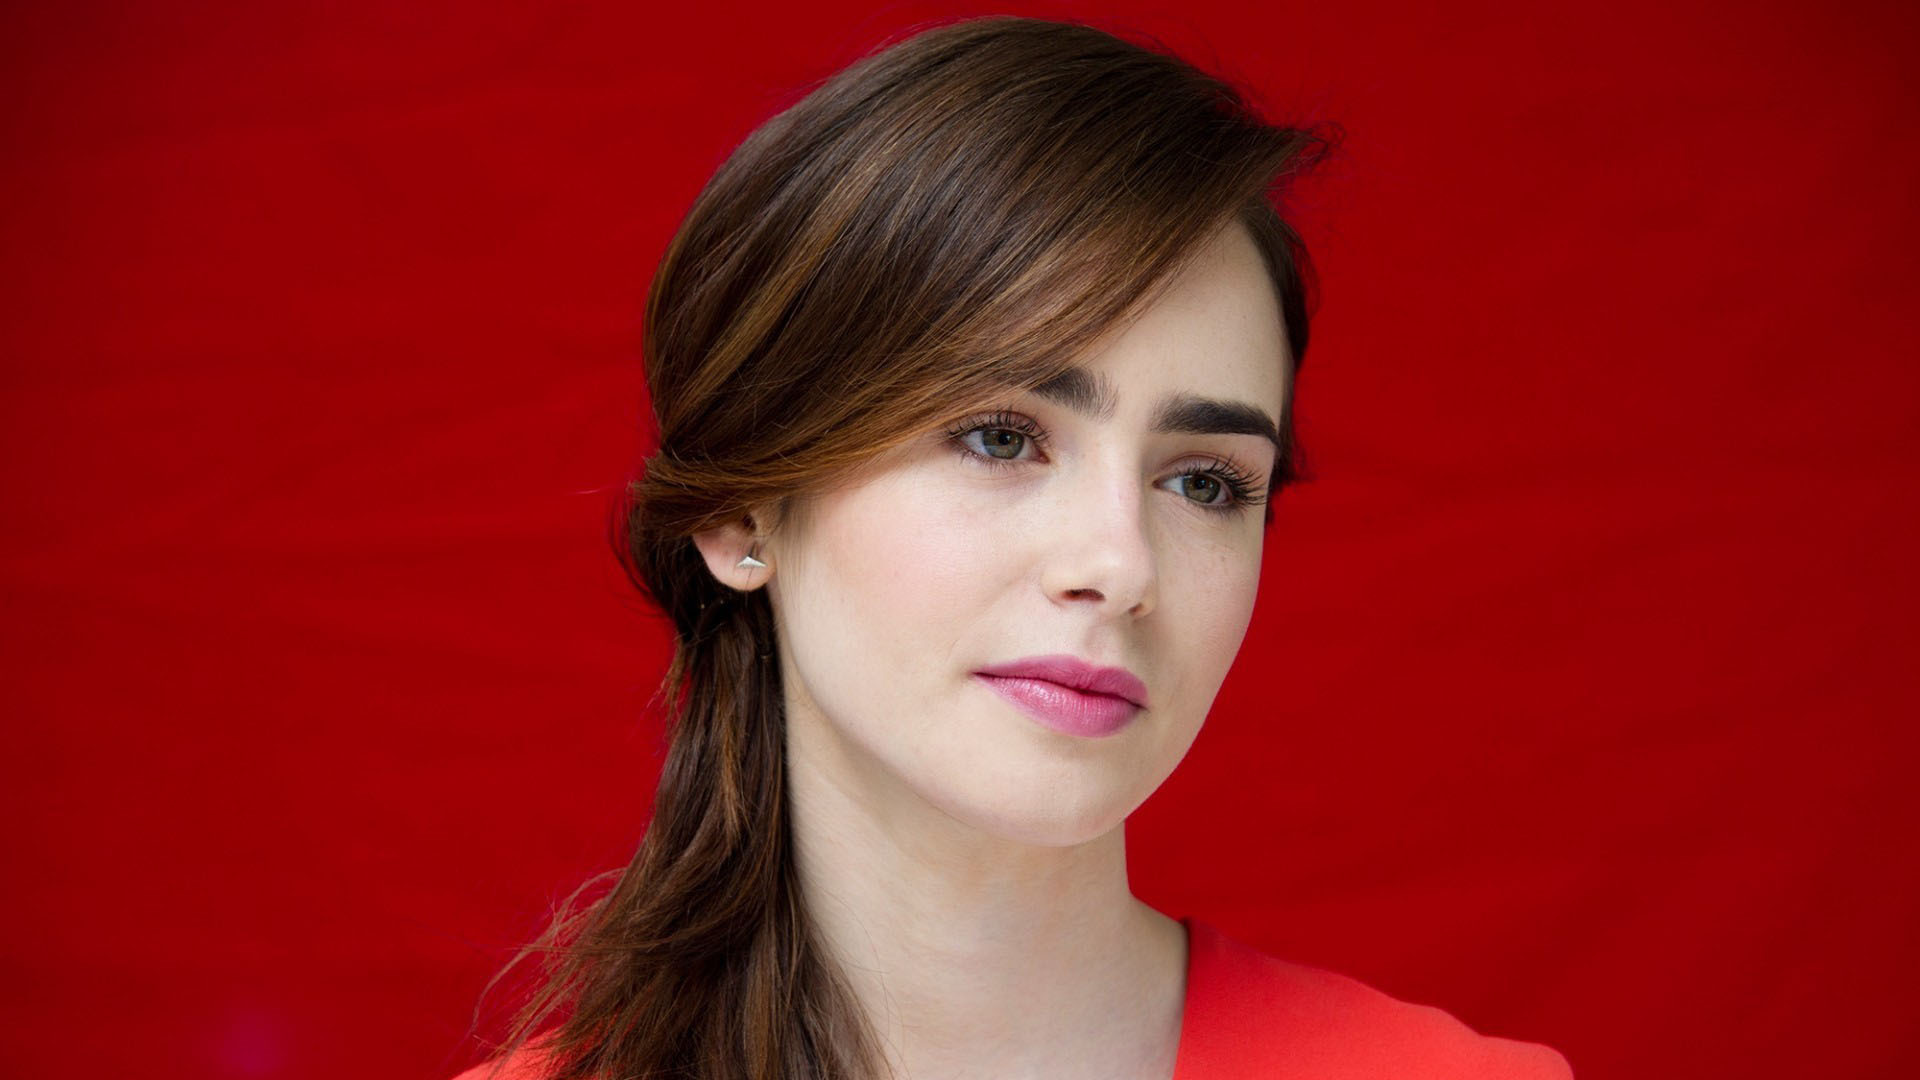 lily collins wallpaper,hair,face,hairstyle,chin,eyebrow